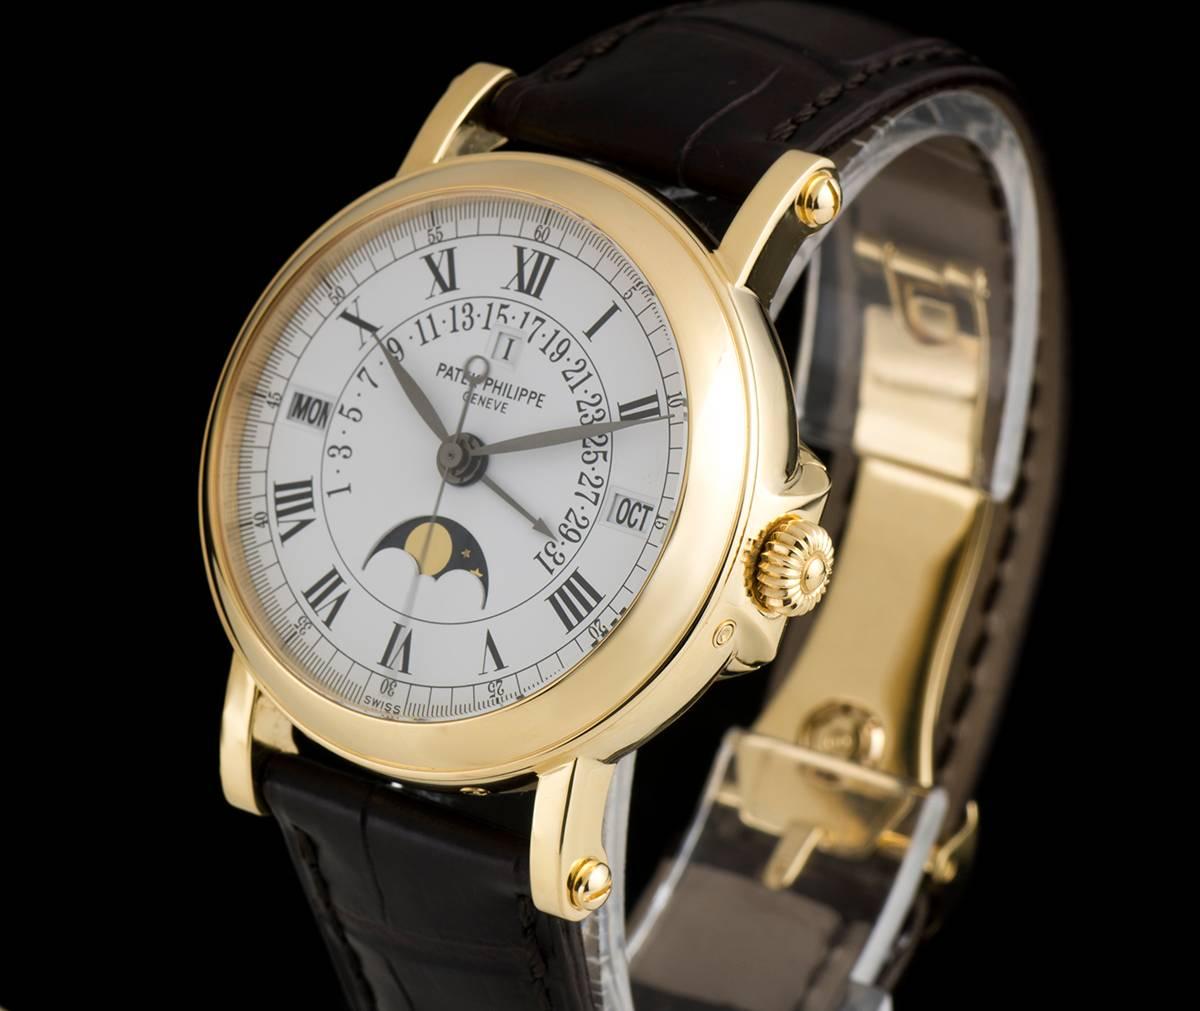 An 18k Yellow Gold Perpetual Calendar Retrograde Gents Wristwatch, white dial with roman numerals, month at 3 0'clock, retrograde date displayed between 8 and 4 0'clock, moonphase aperture at 6 0'clock, weekday at 9 0'clock, leap year indicator at